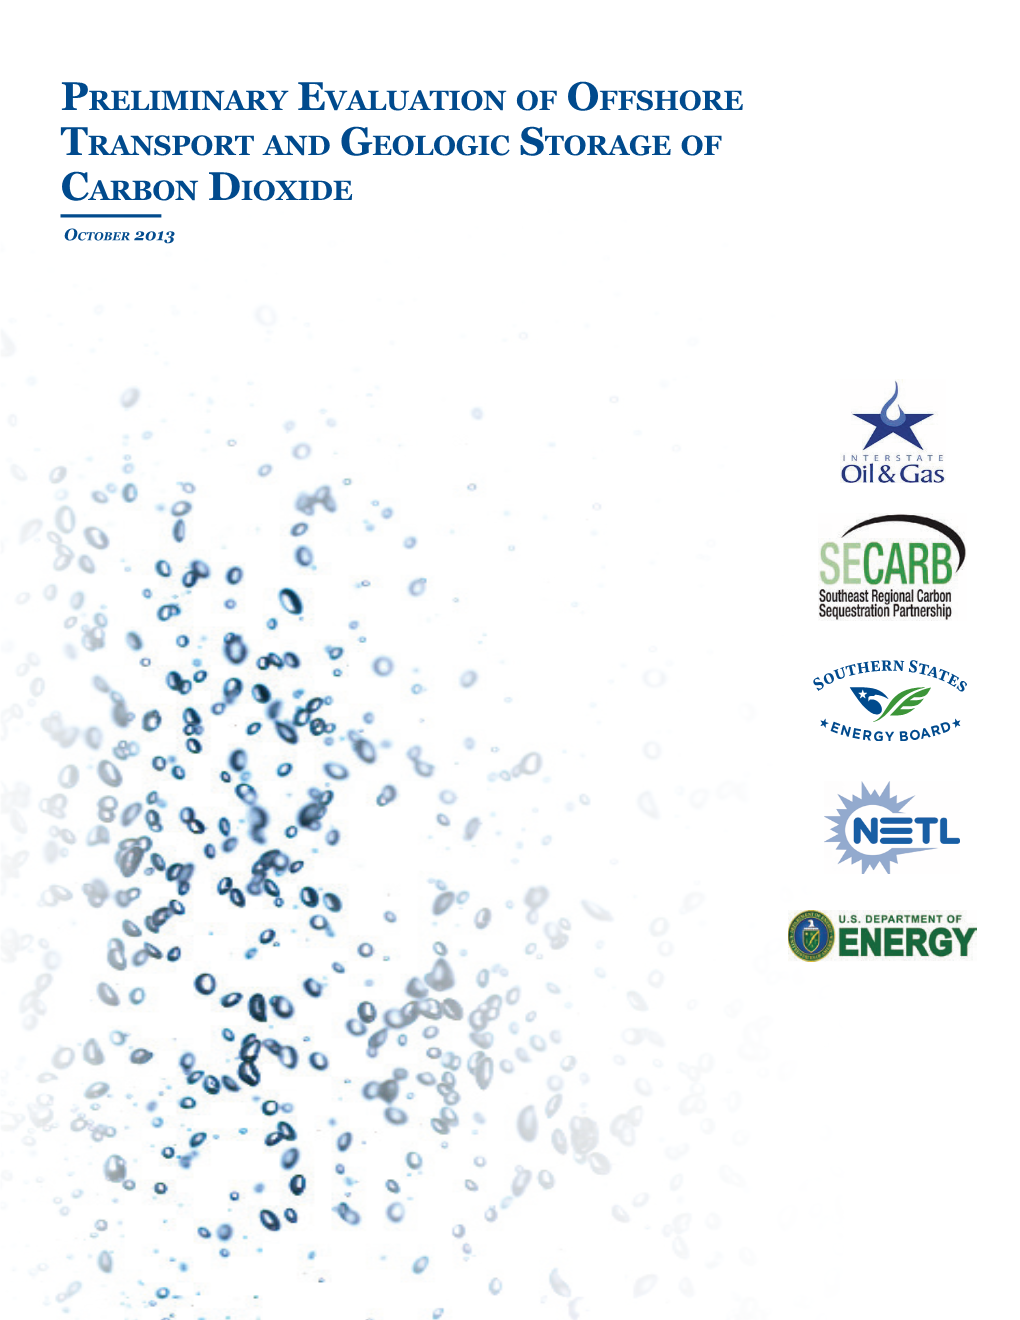 Preliminary Evaluation of Offshore Transport and Geologic Storage of Carbon Dioxide